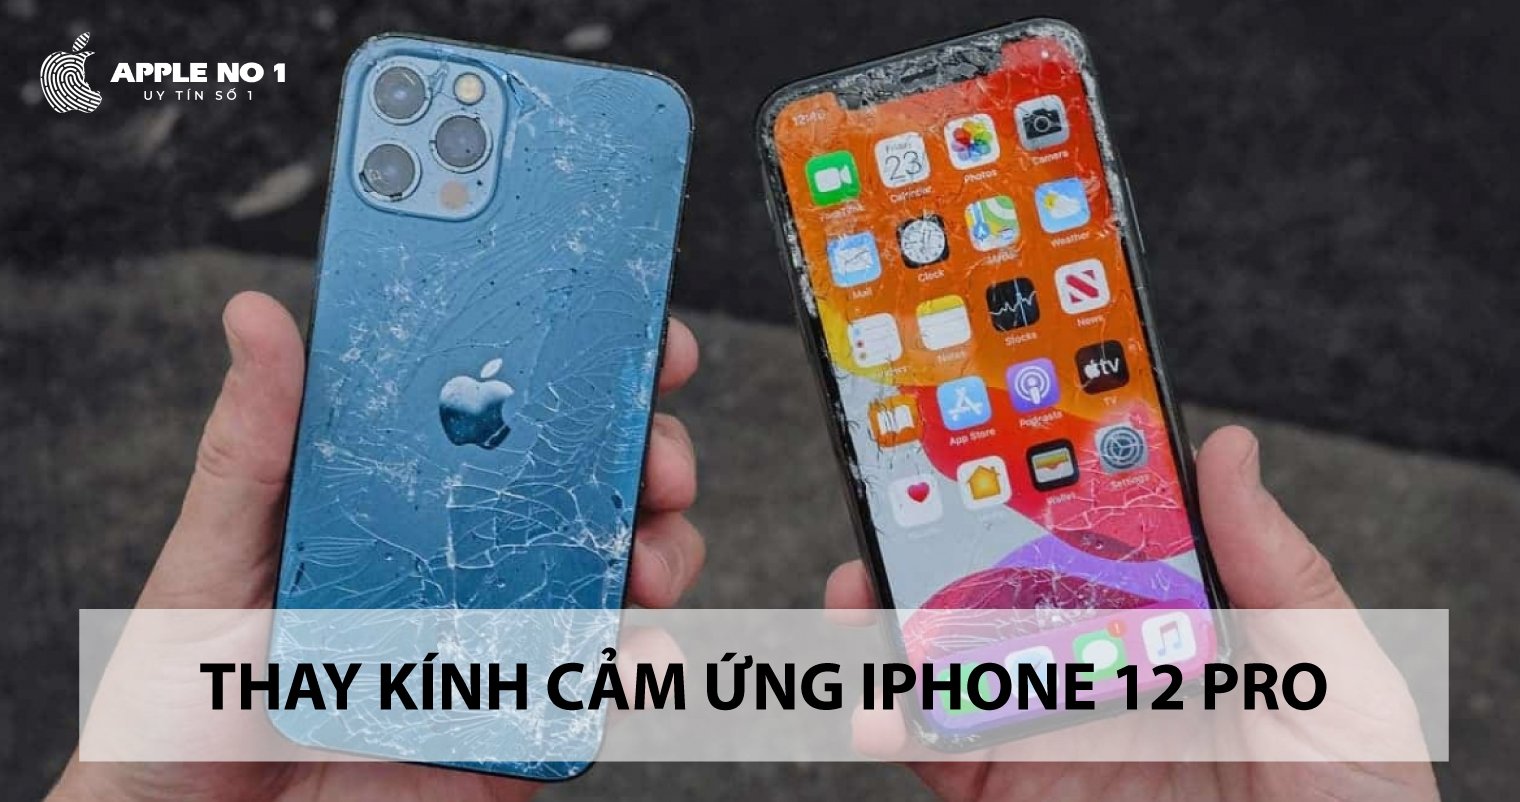 thay kinh cam ung iphone 12 pro